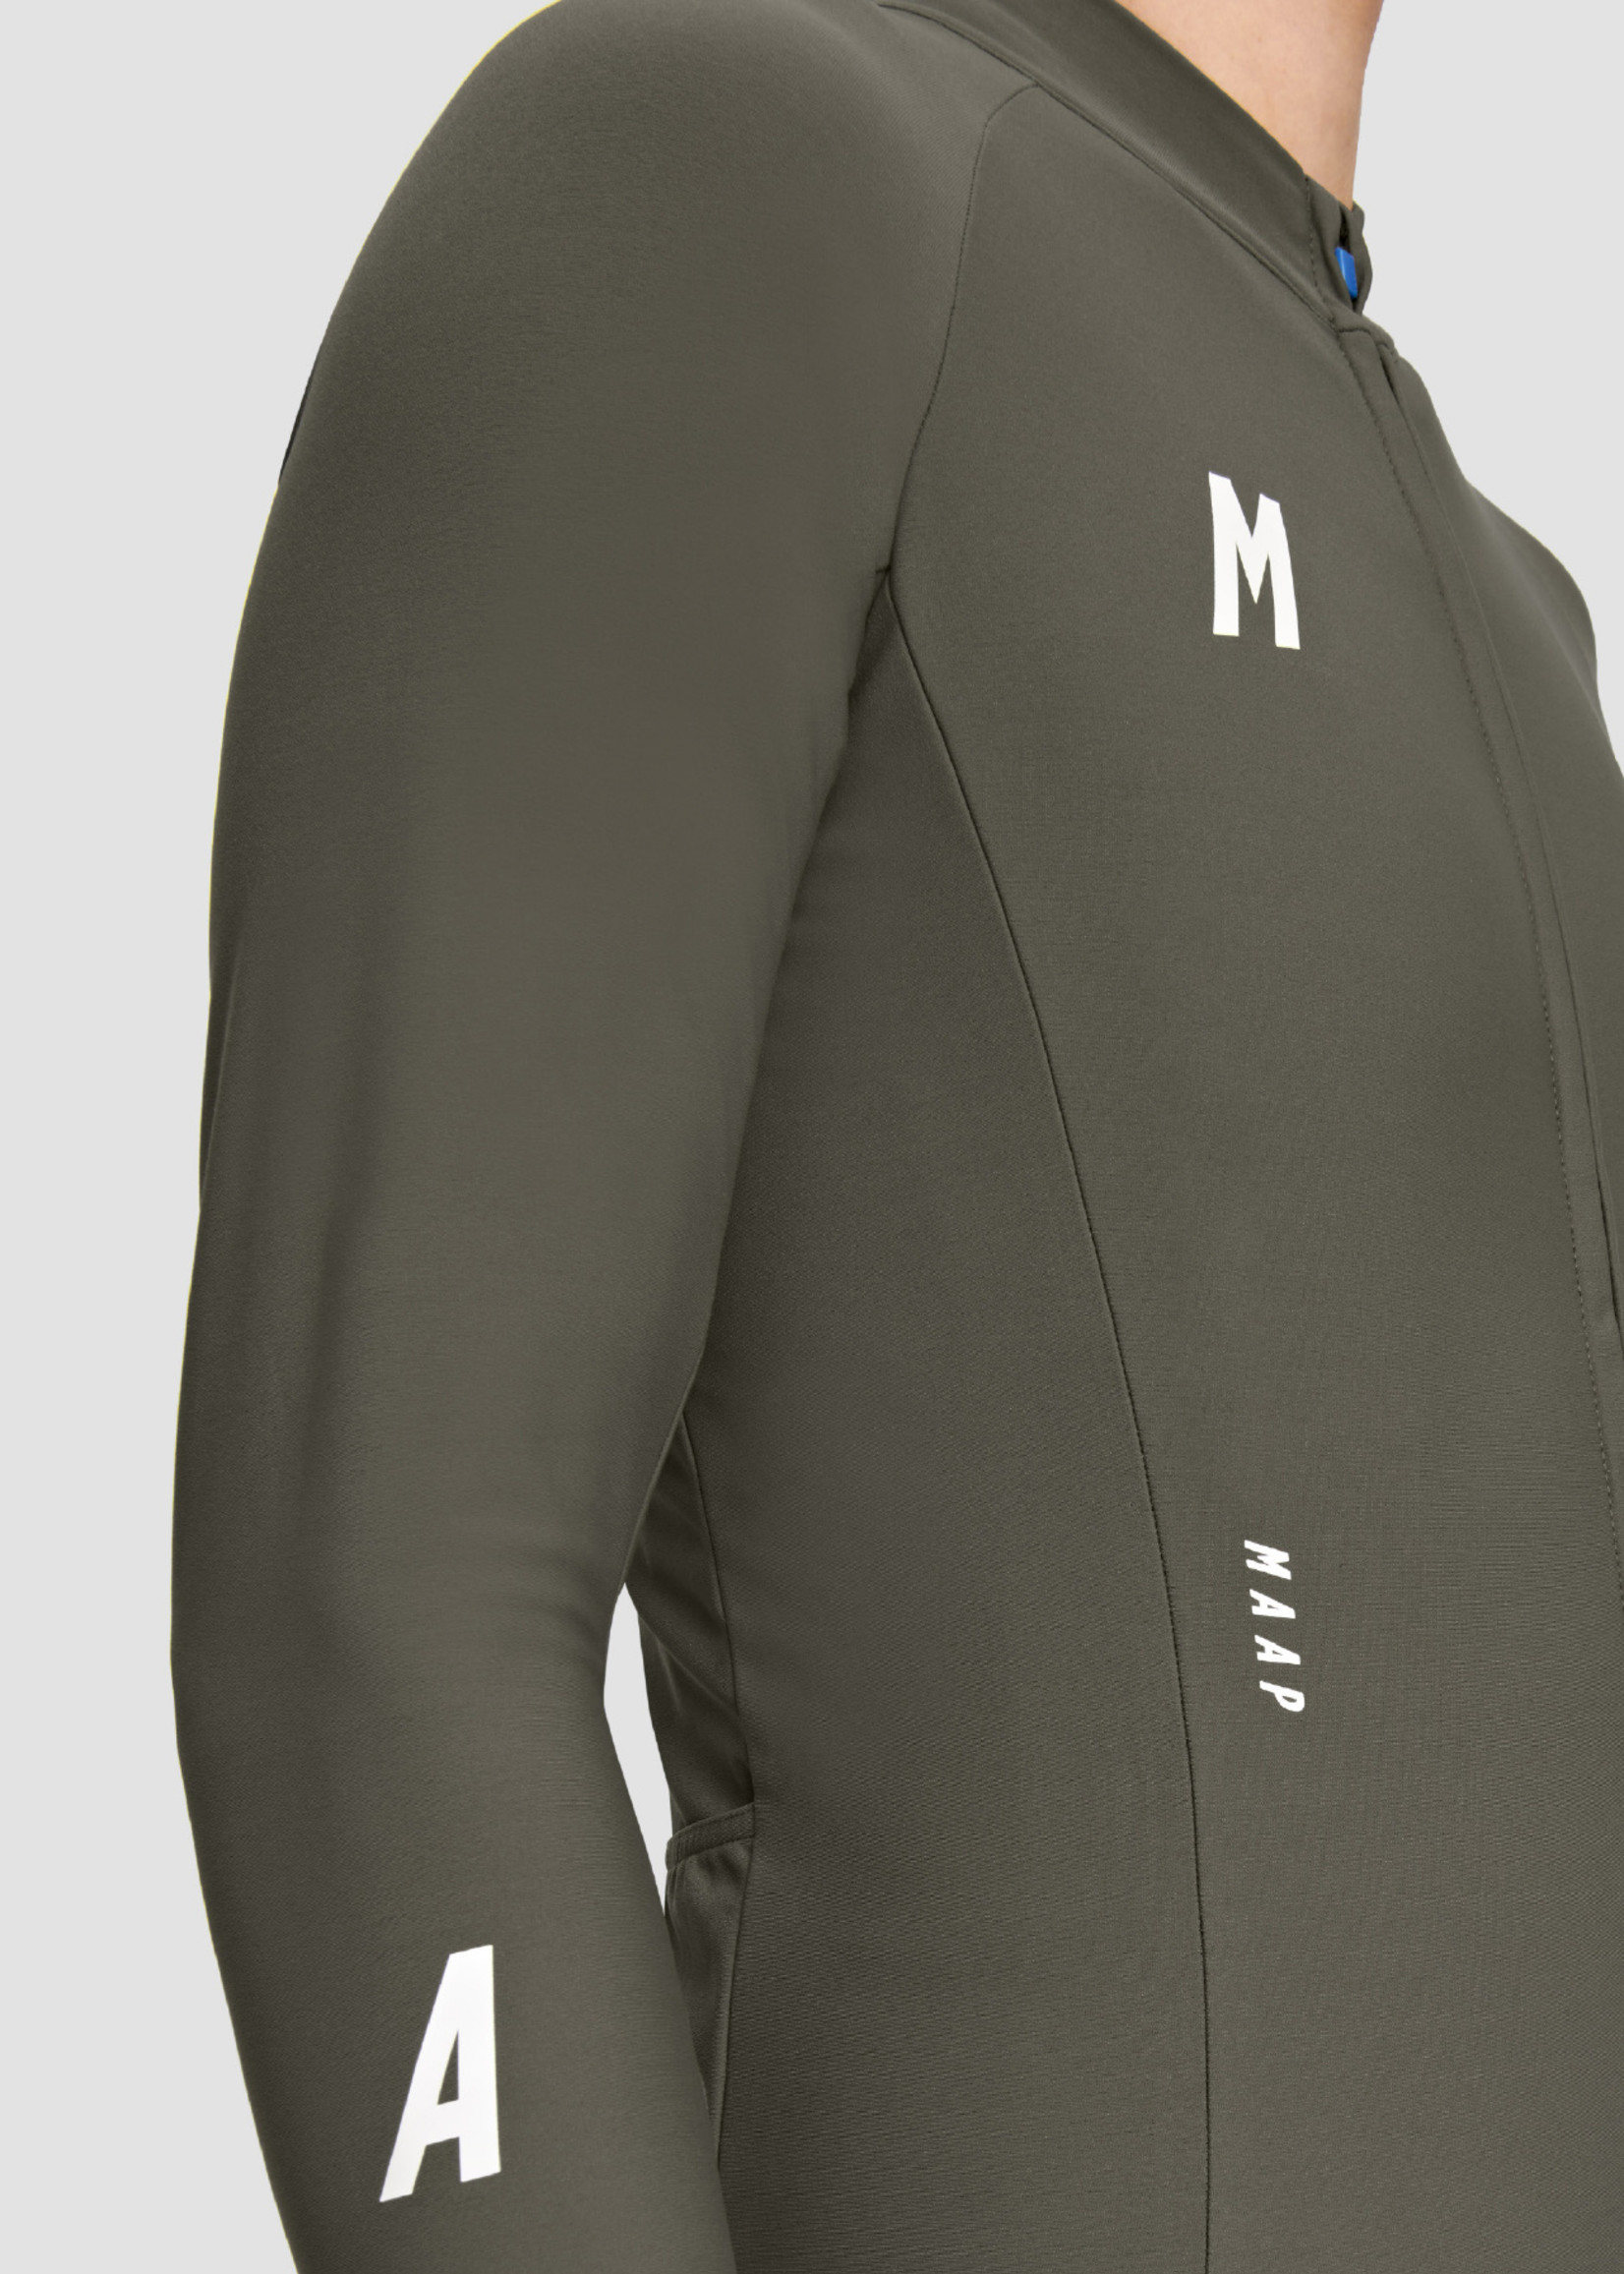 Maap Training Thermal LS Jersey - Light Olive